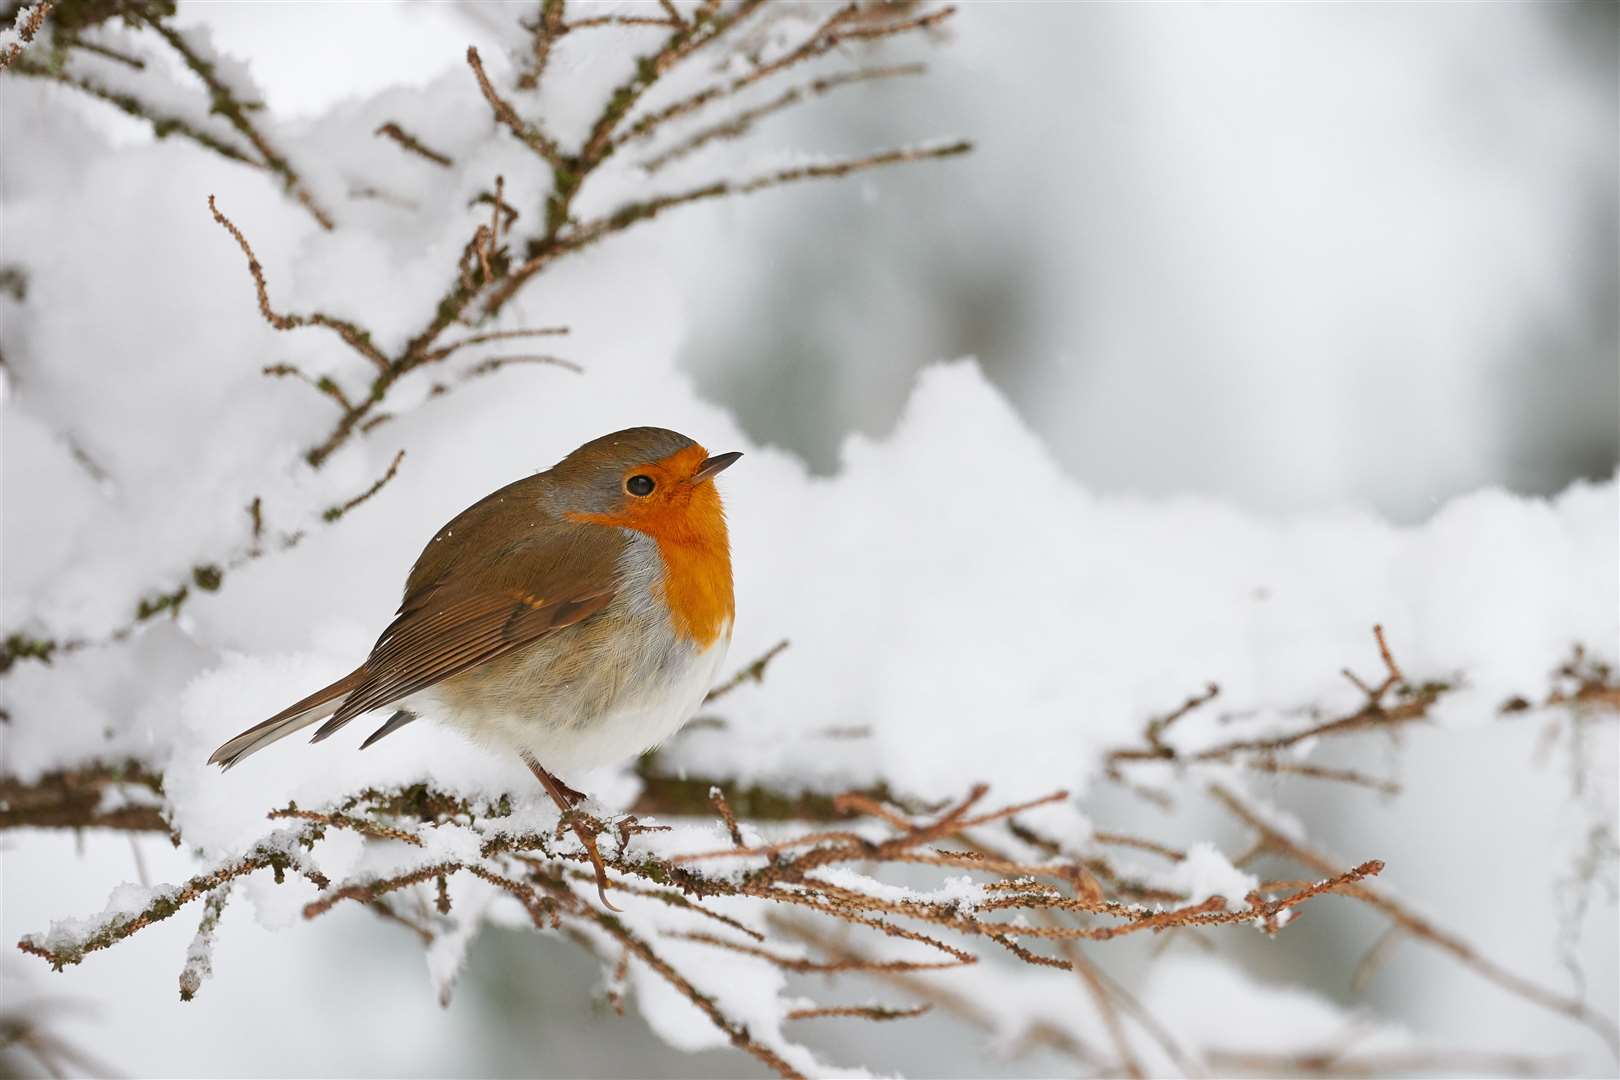 No winter garden would be complete without a robin redbreast.